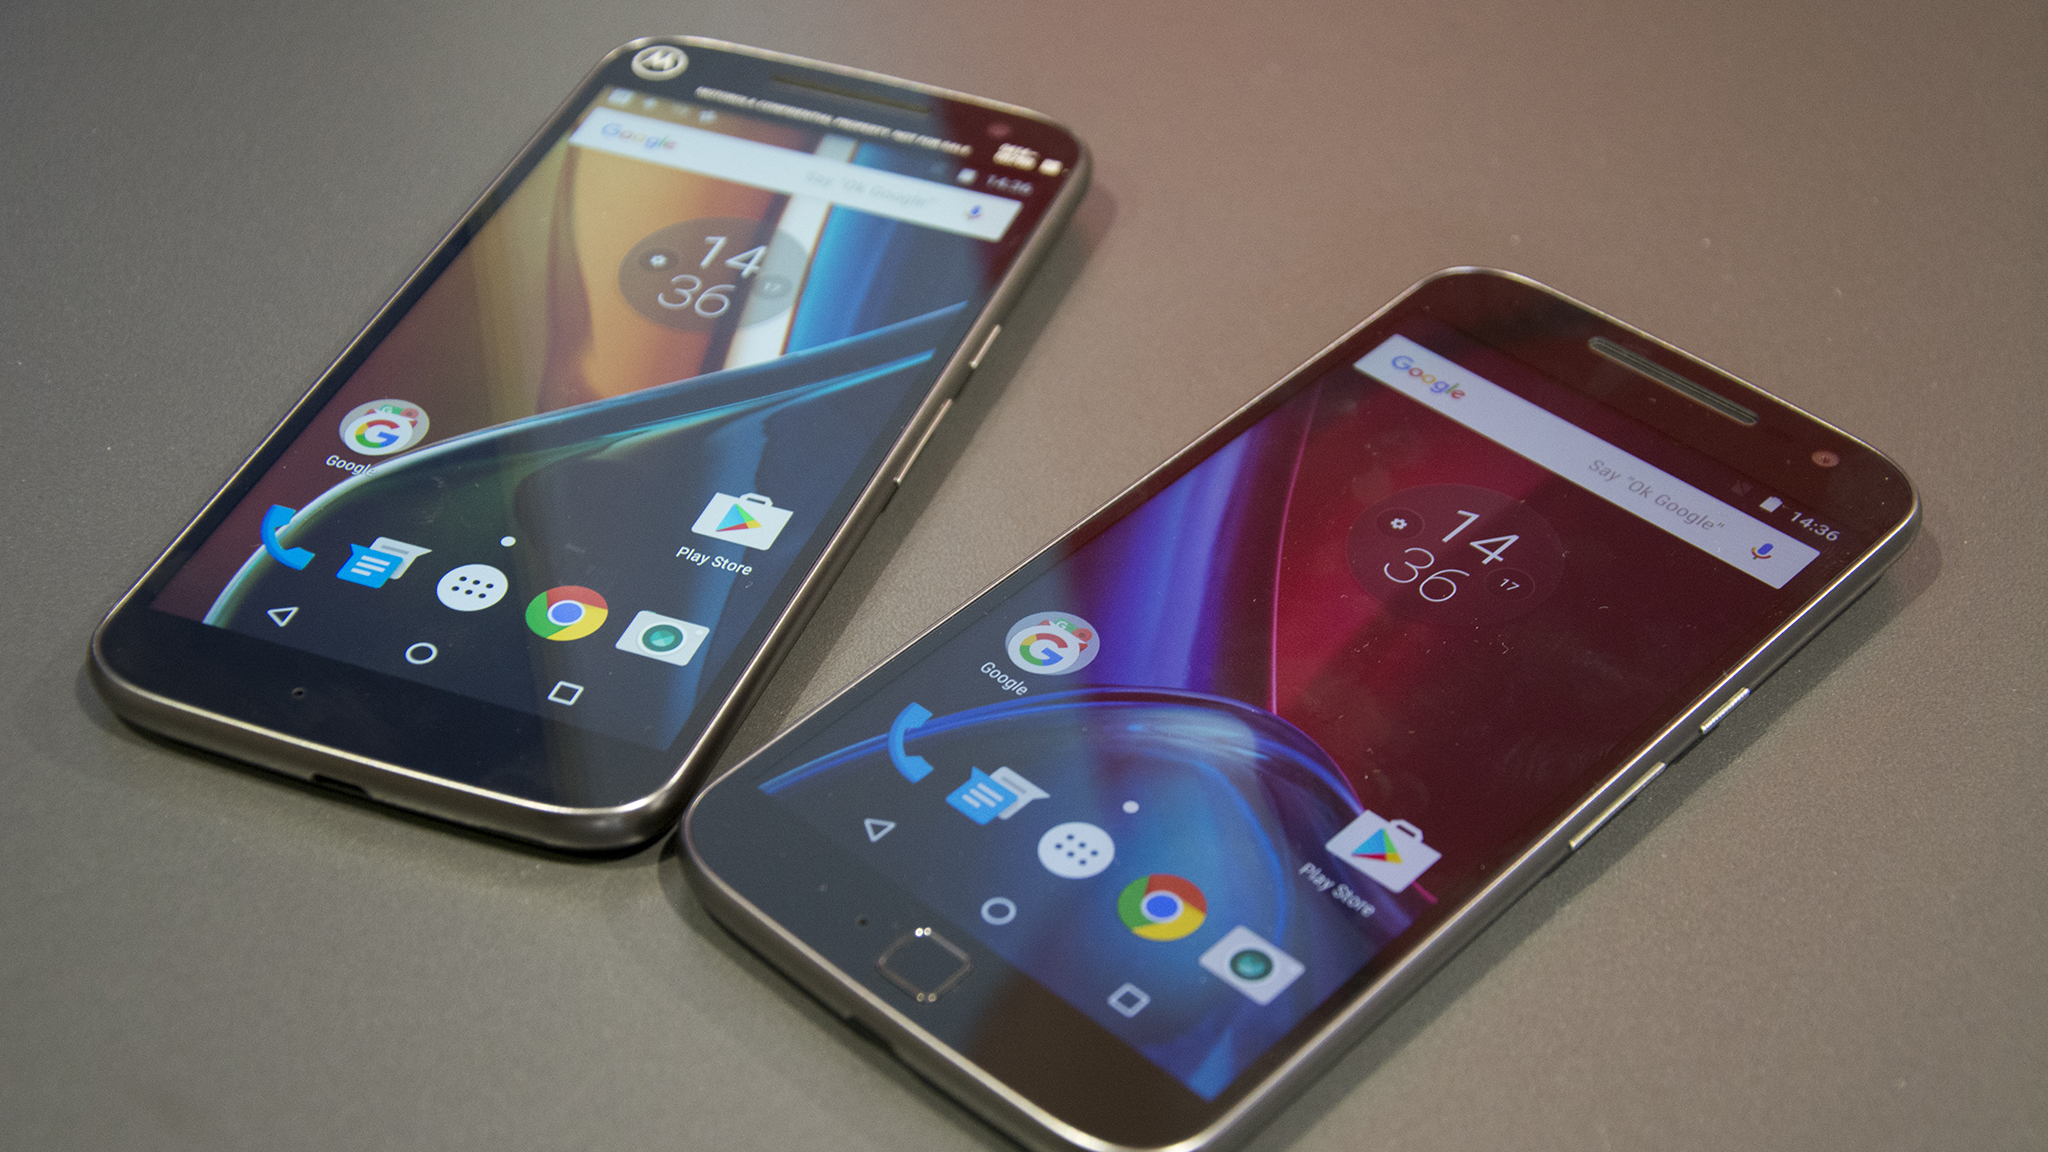 Dierentuin levering Voorschrift Motorola Moto G4 and G4 Plus review (Hands-on): Don't call it the Moto G (4th  Gen)